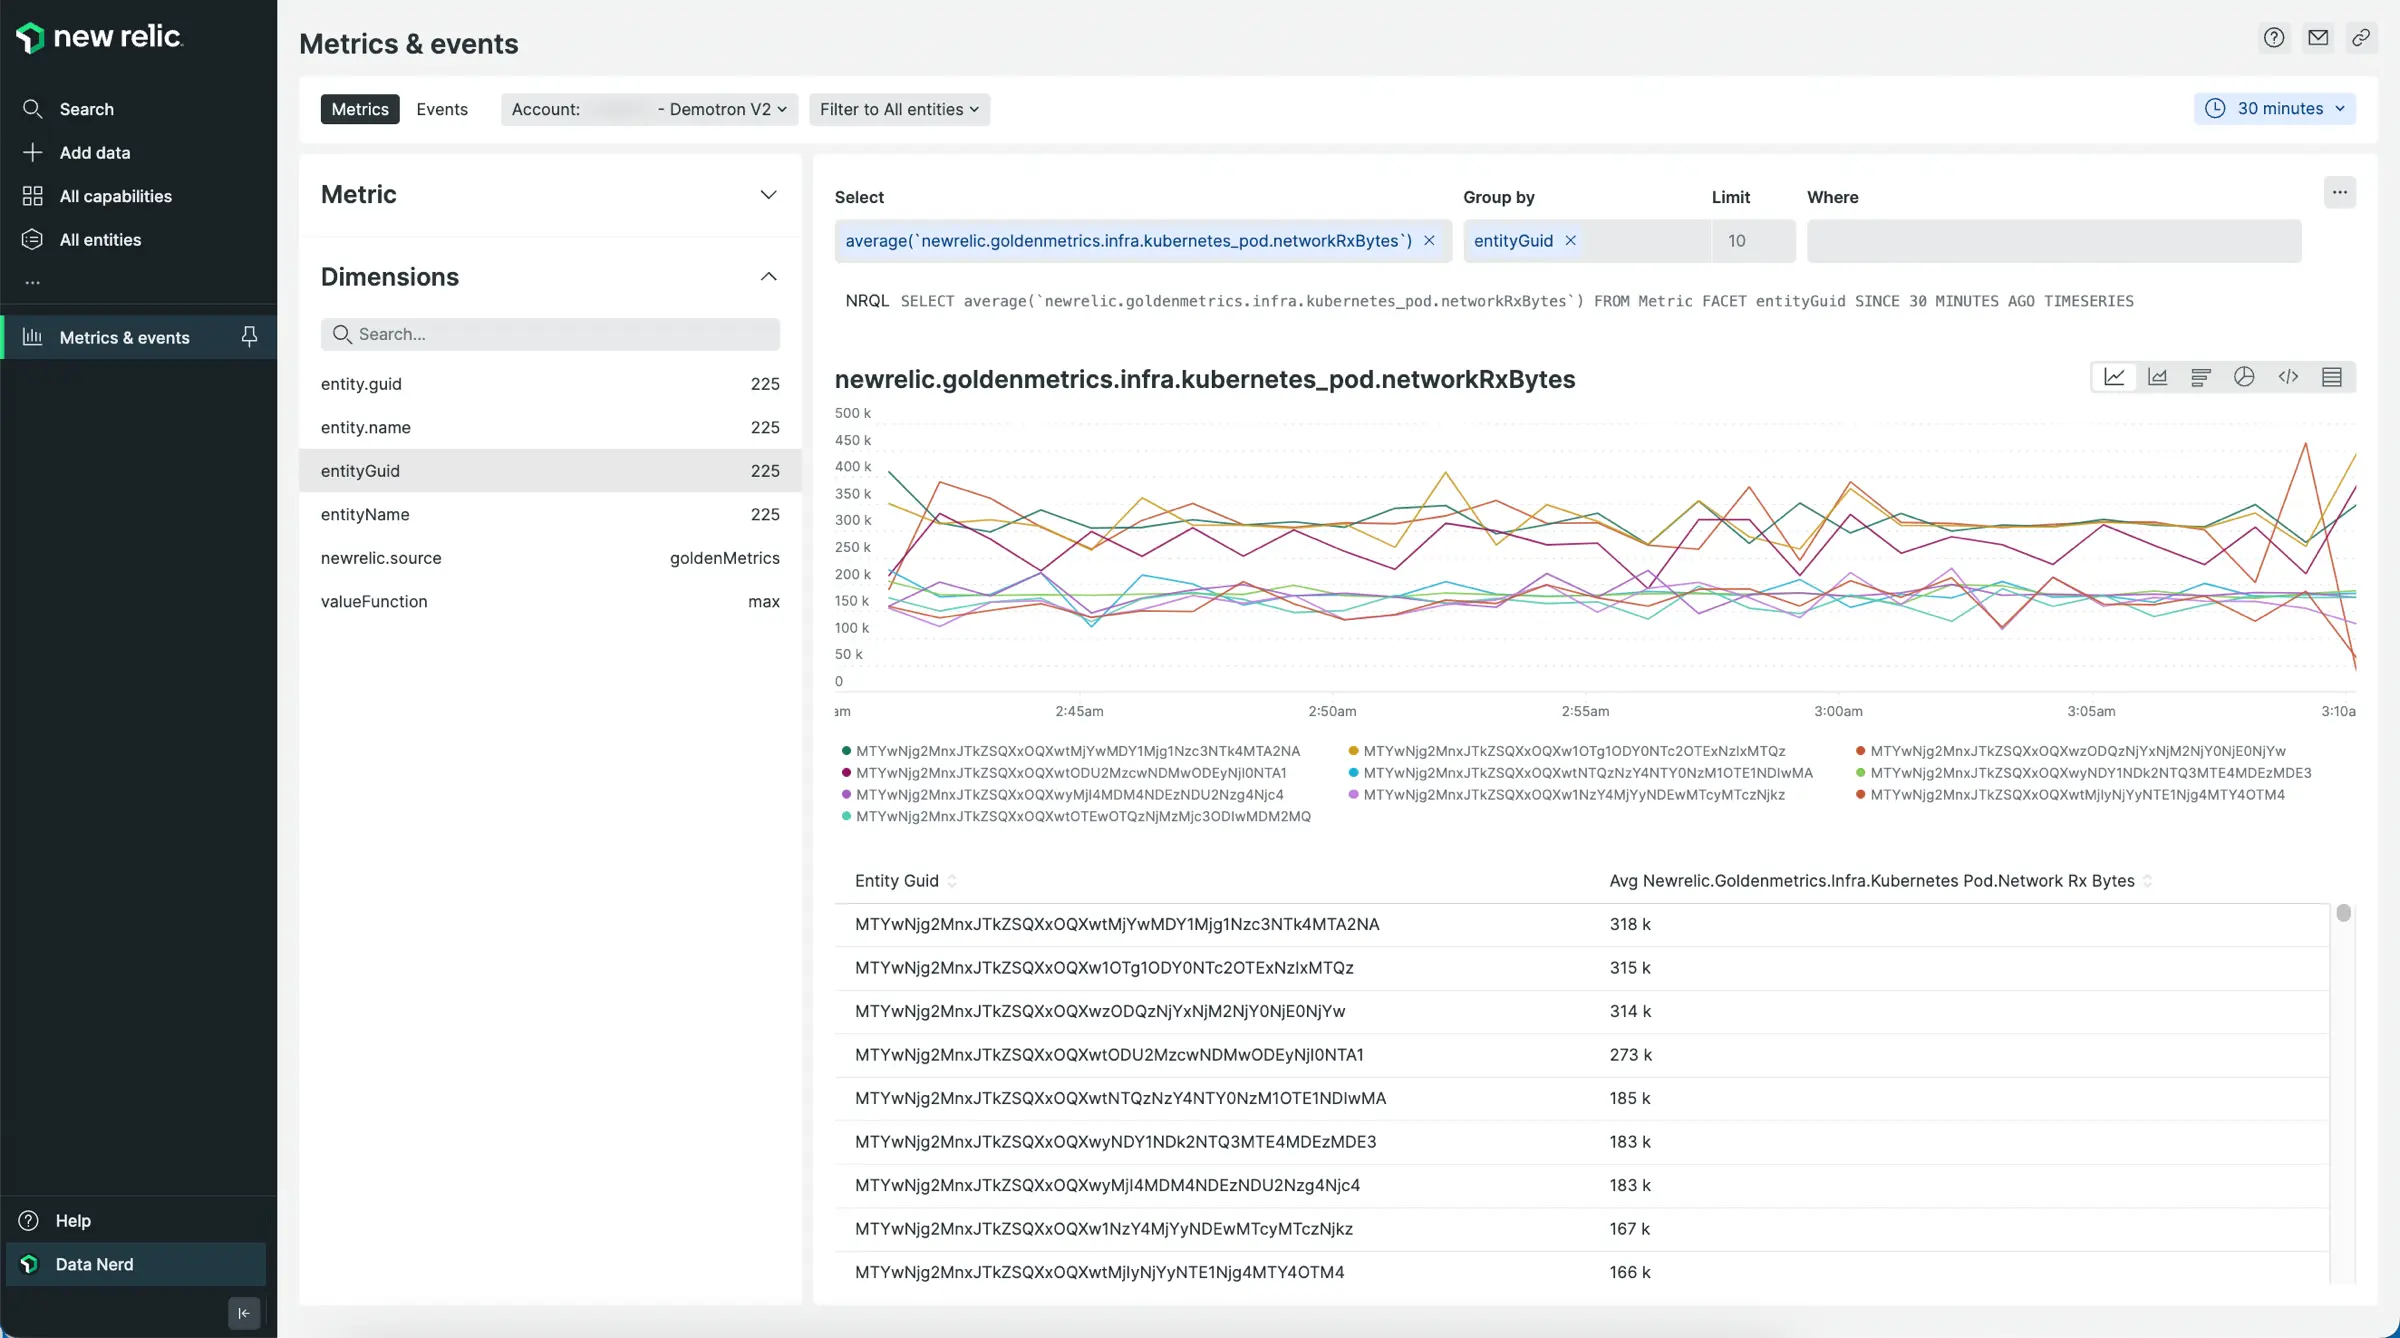 Metrics and events view